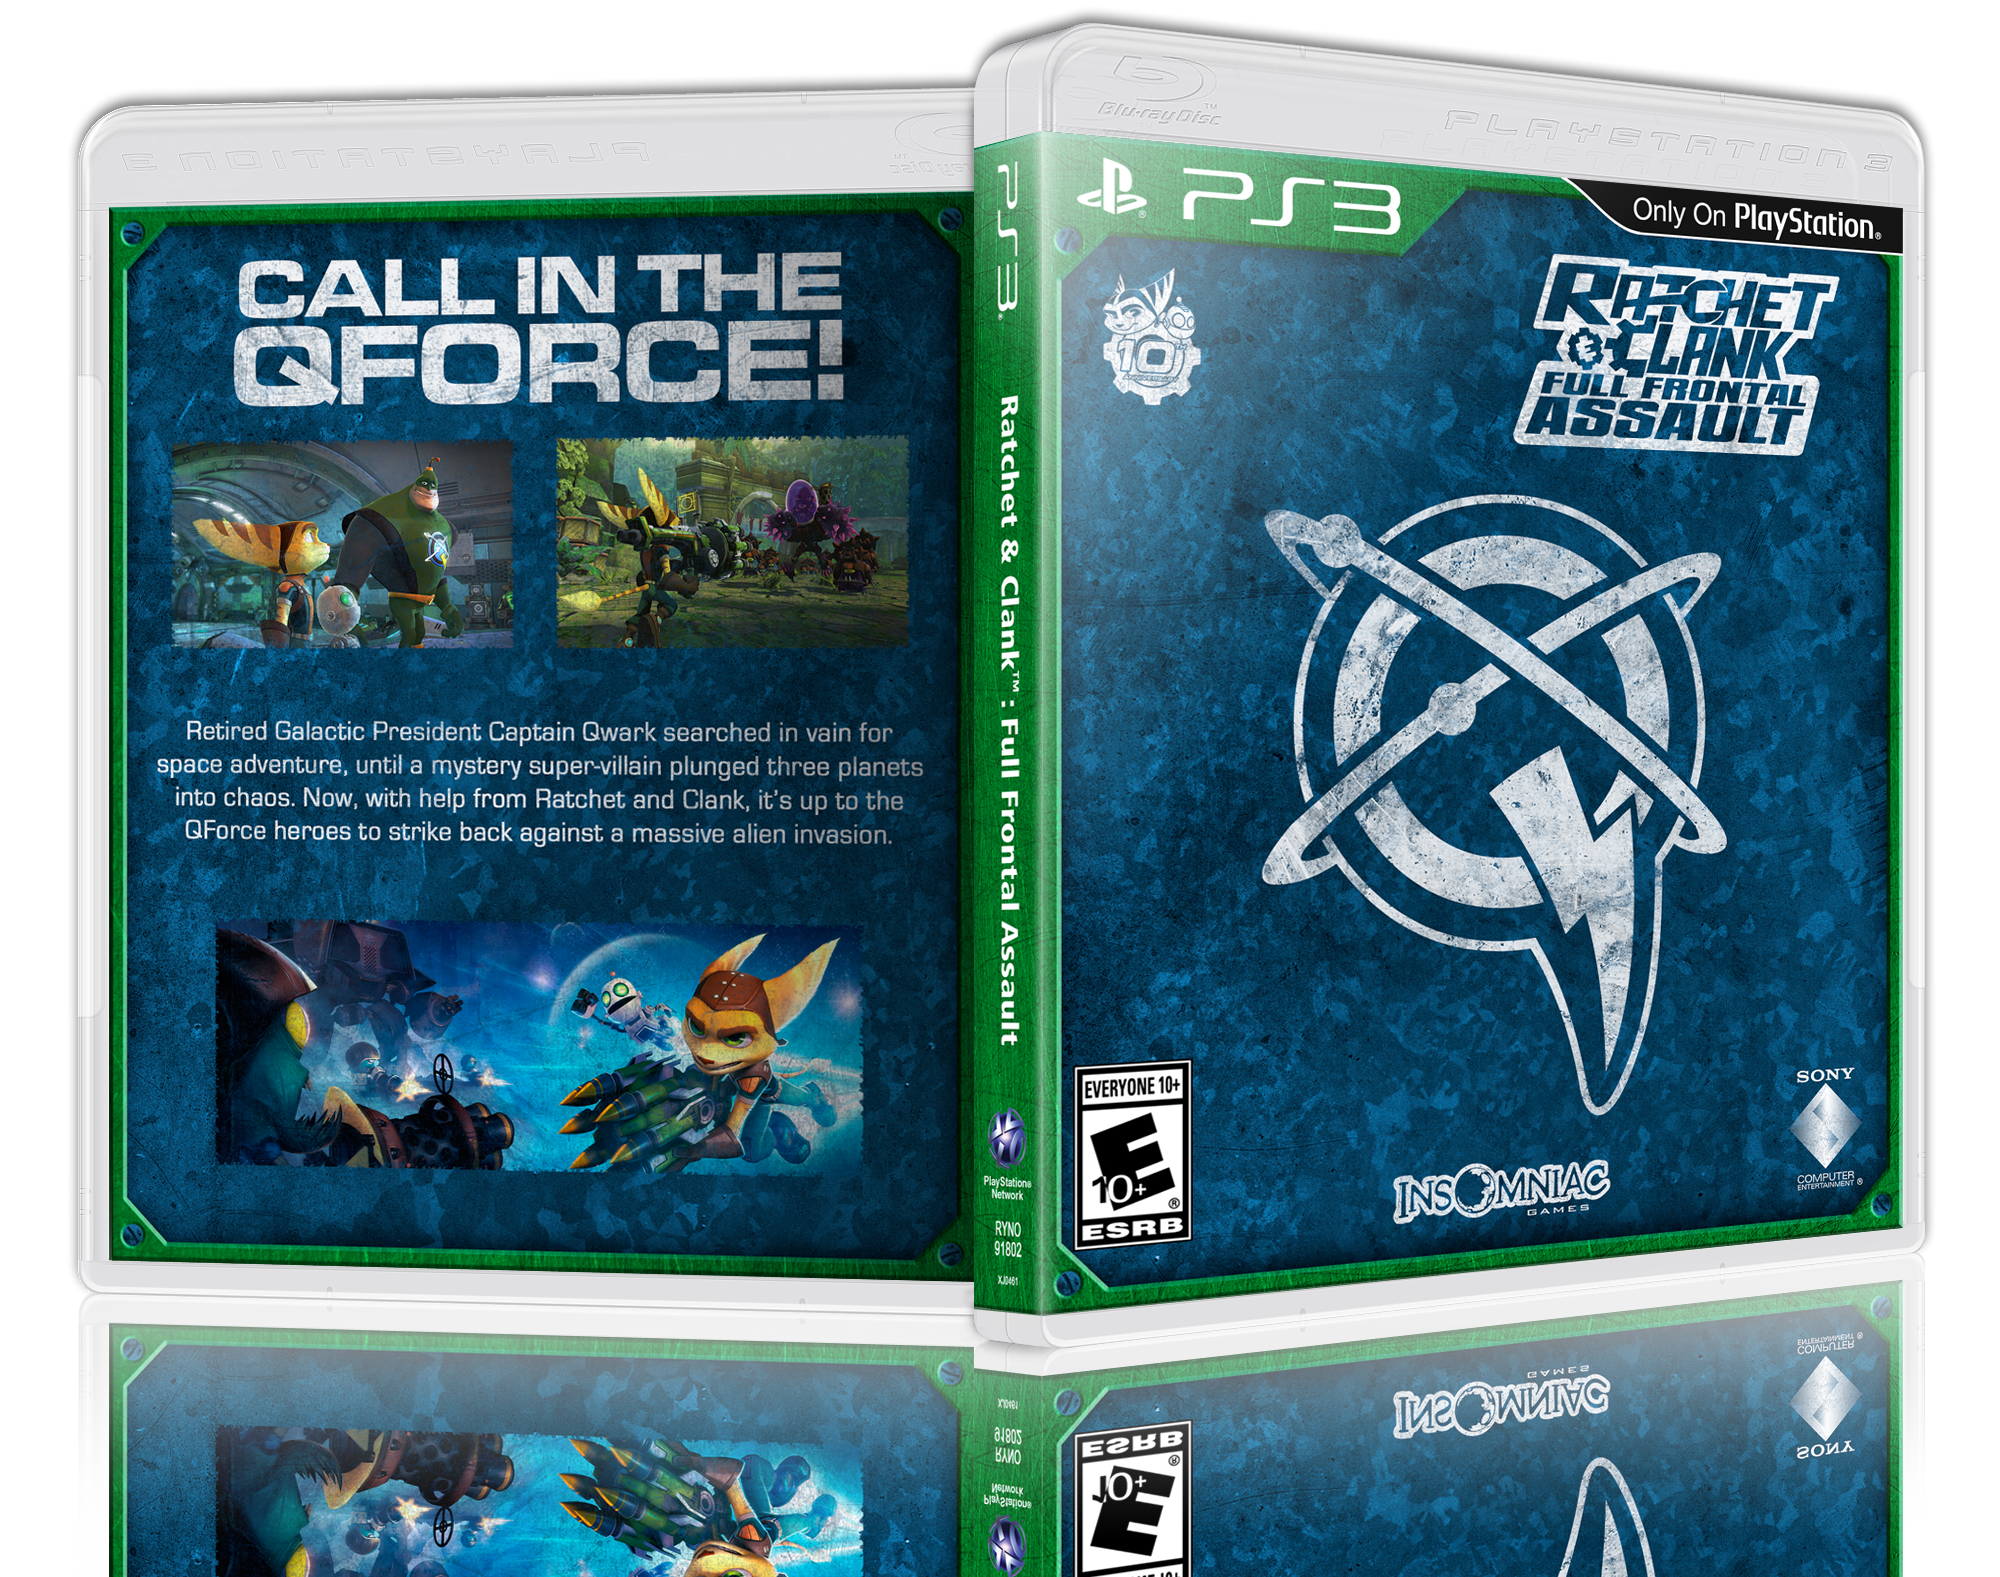 Ratchet & Clank: Full Frontal Assault box cover